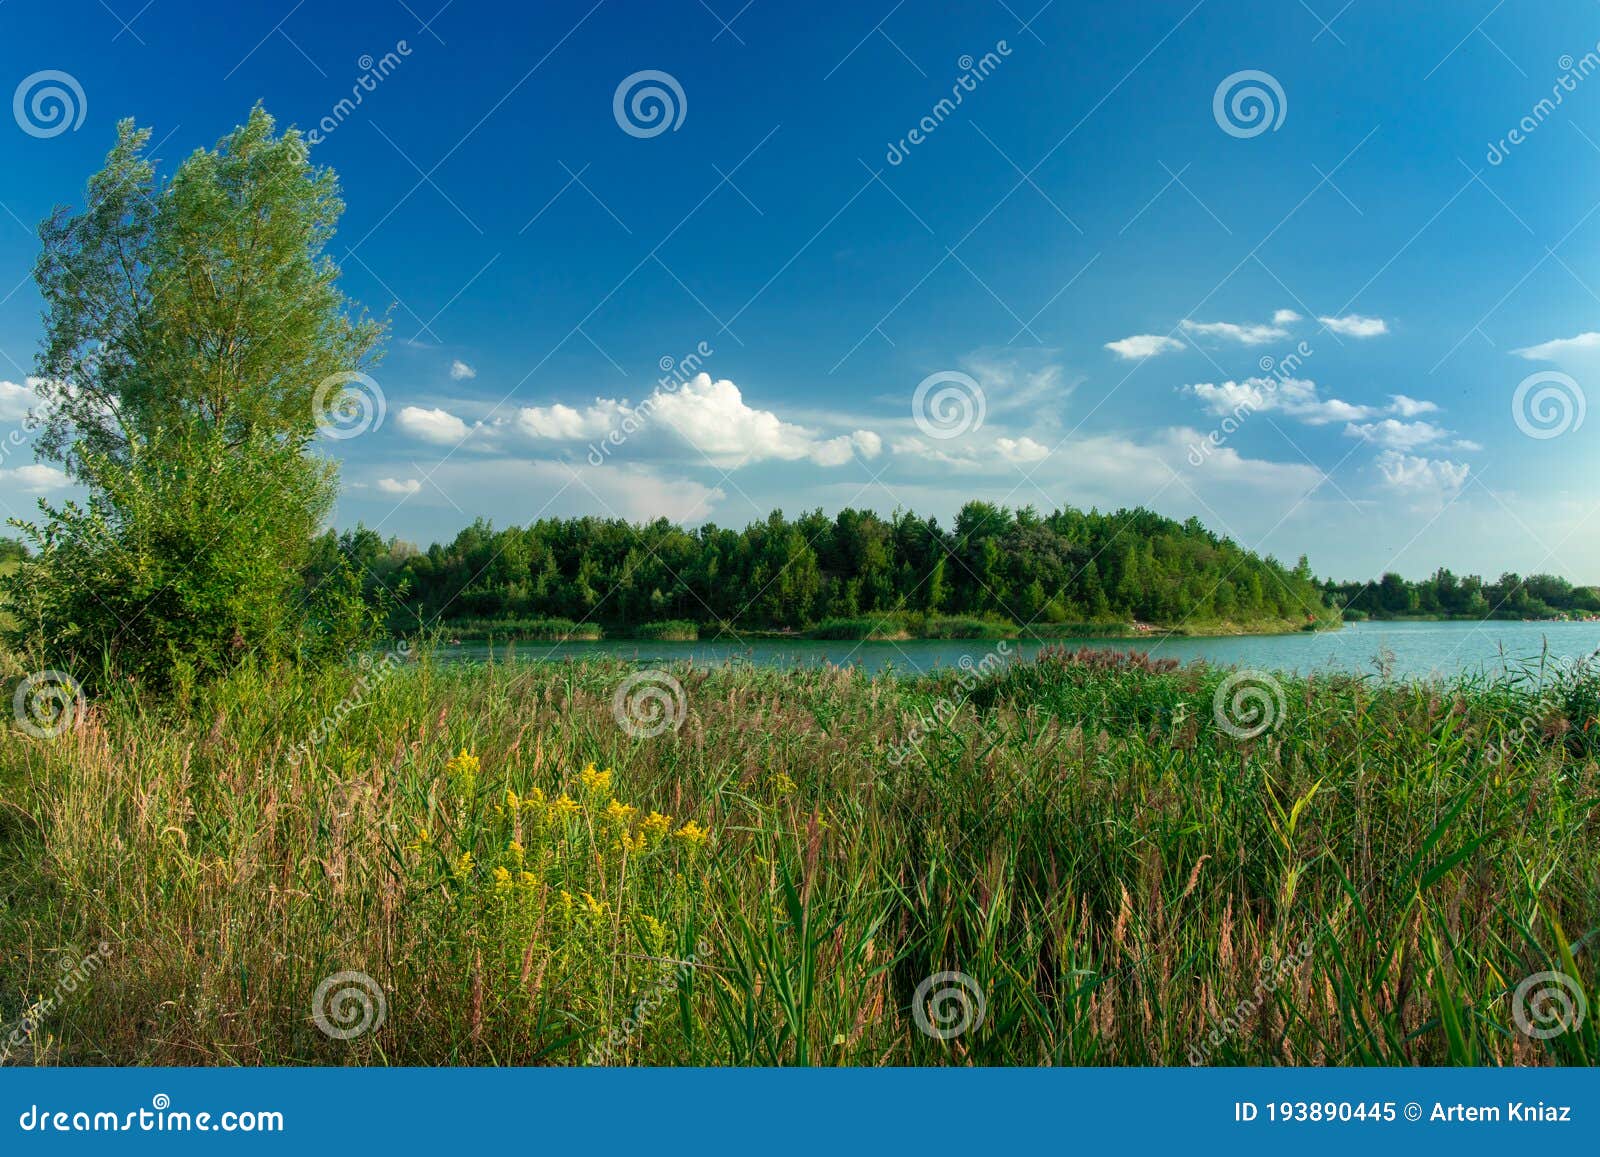 Summer Landscape Green Grass Field Tree And Lake Nature Outdoor